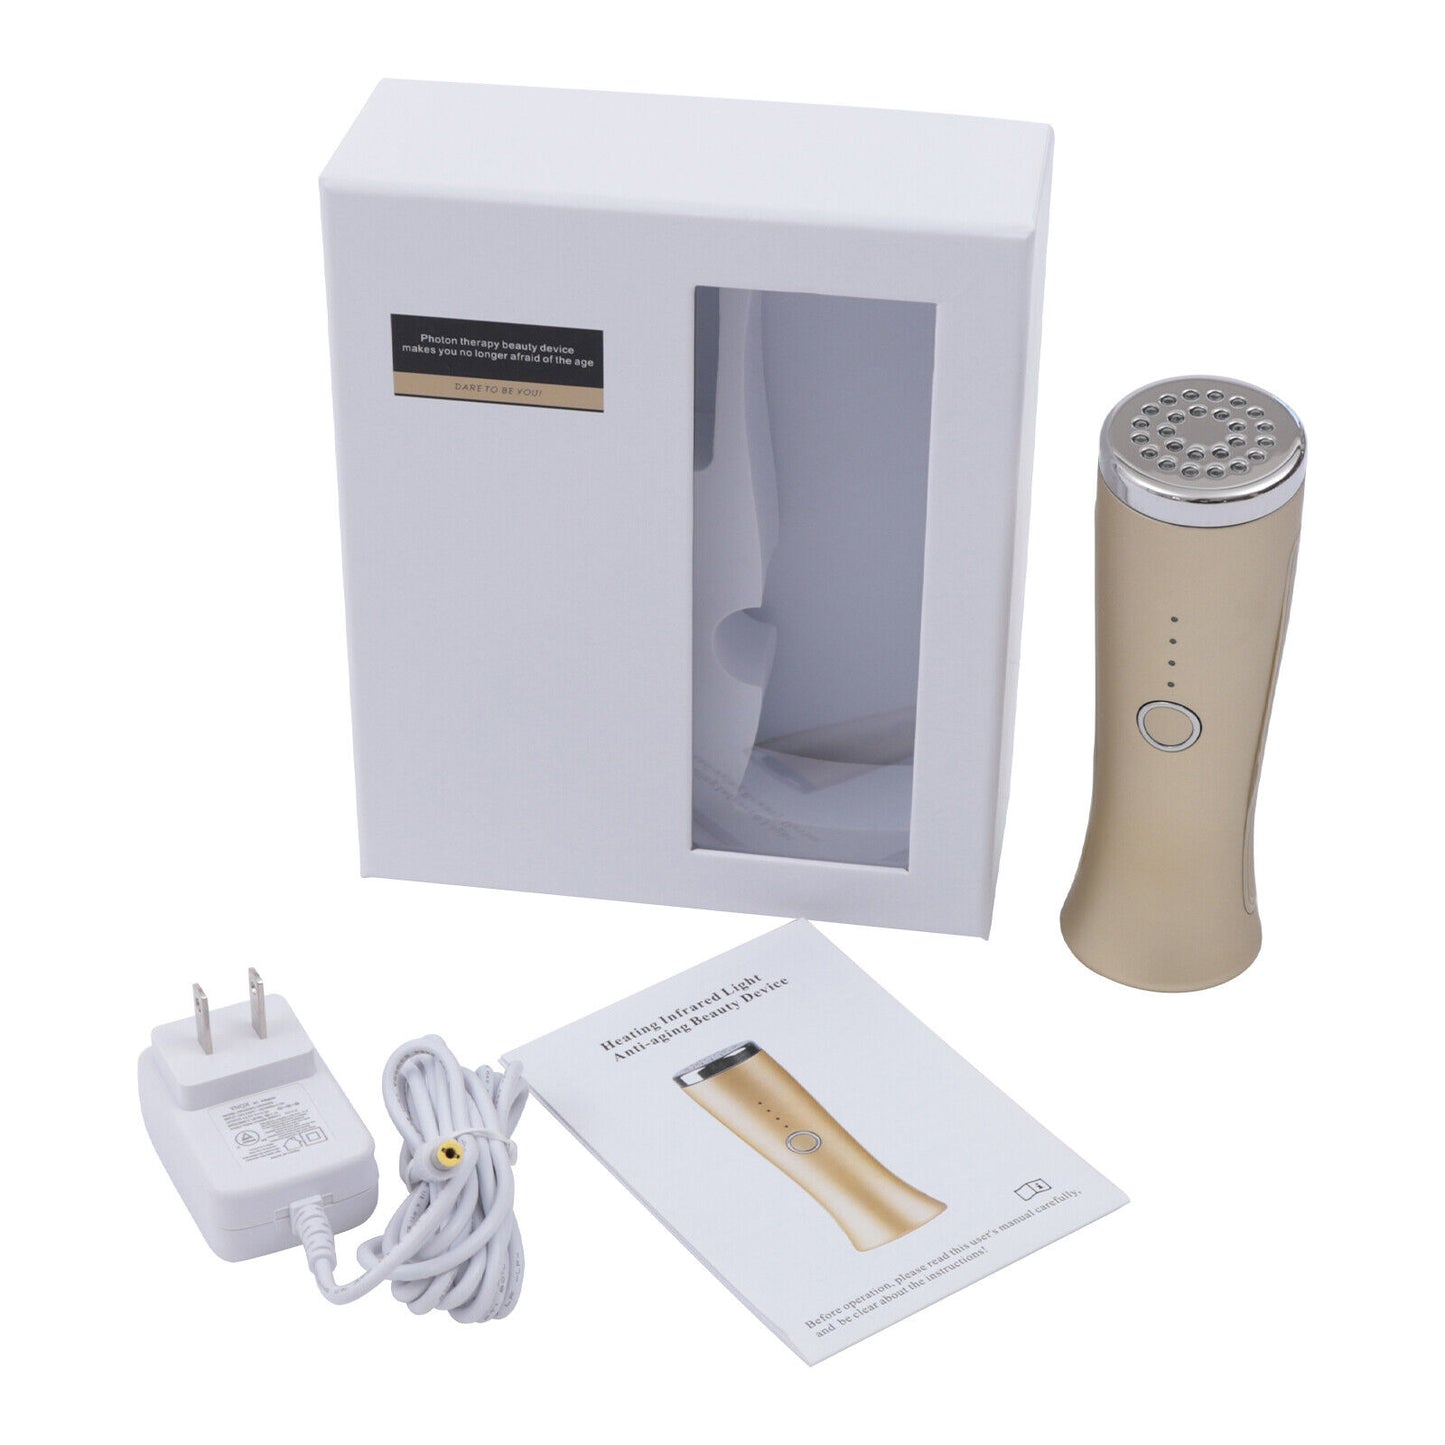 SPECIAL OFFER - Bio-Light Infrared Therapy Anti-Aging Face Device